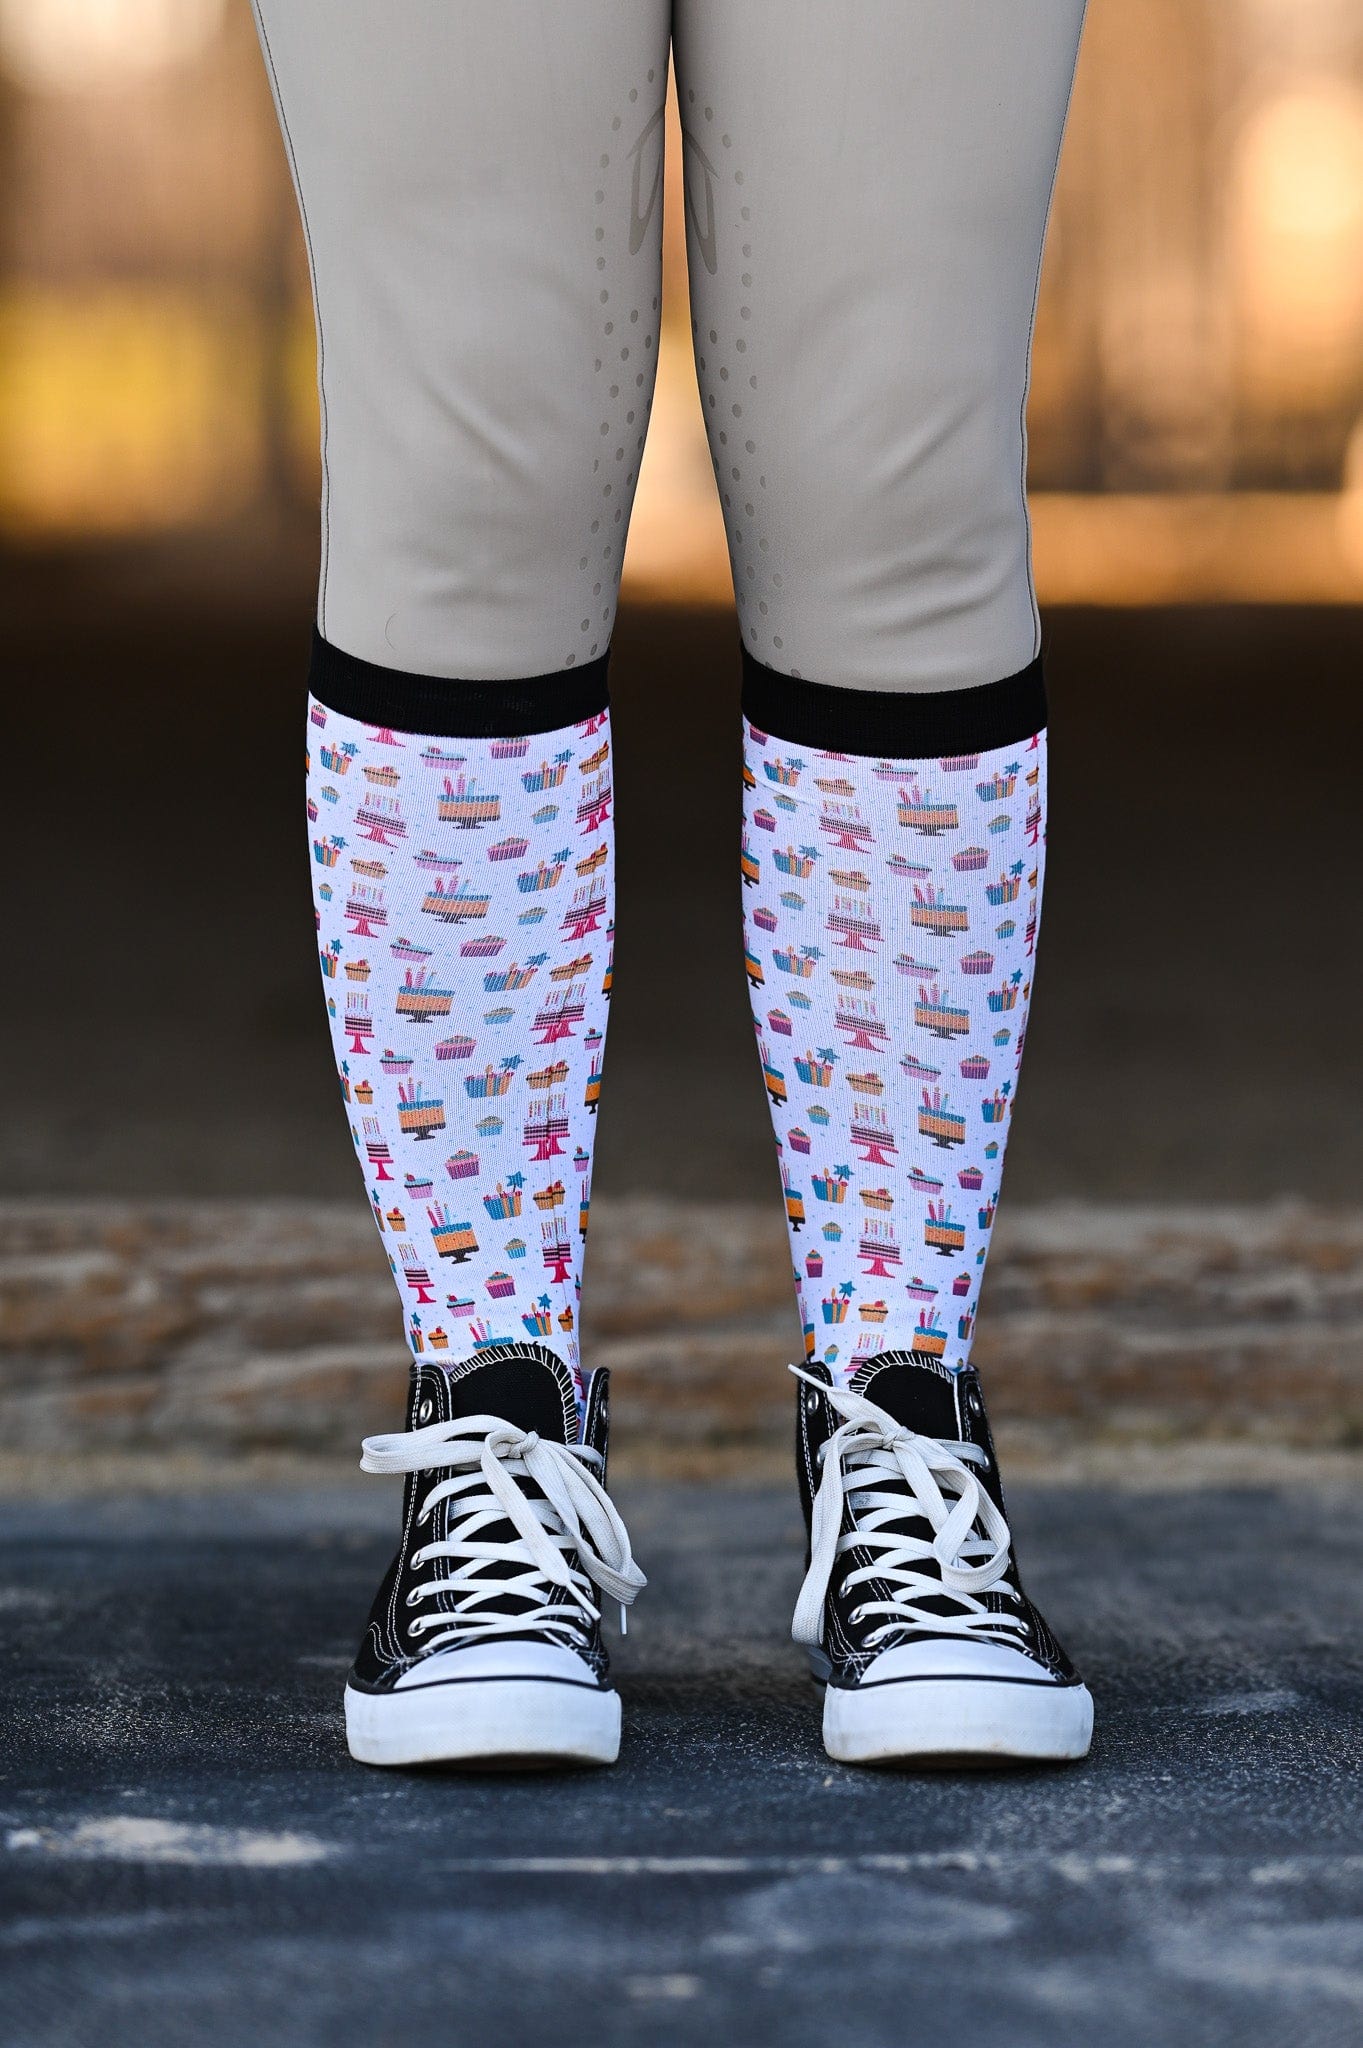 dreamers & schemers Boot Sock Dreamers & Schemers- Birthday equestrian team apparel online tack store mobile tack store custom farm apparel custom show stable clothing equestrian lifestyle horse show clothing riding clothes Unicorns & Fluffy Clouds Horse Riding  Boot Socks horses equestrian tack store